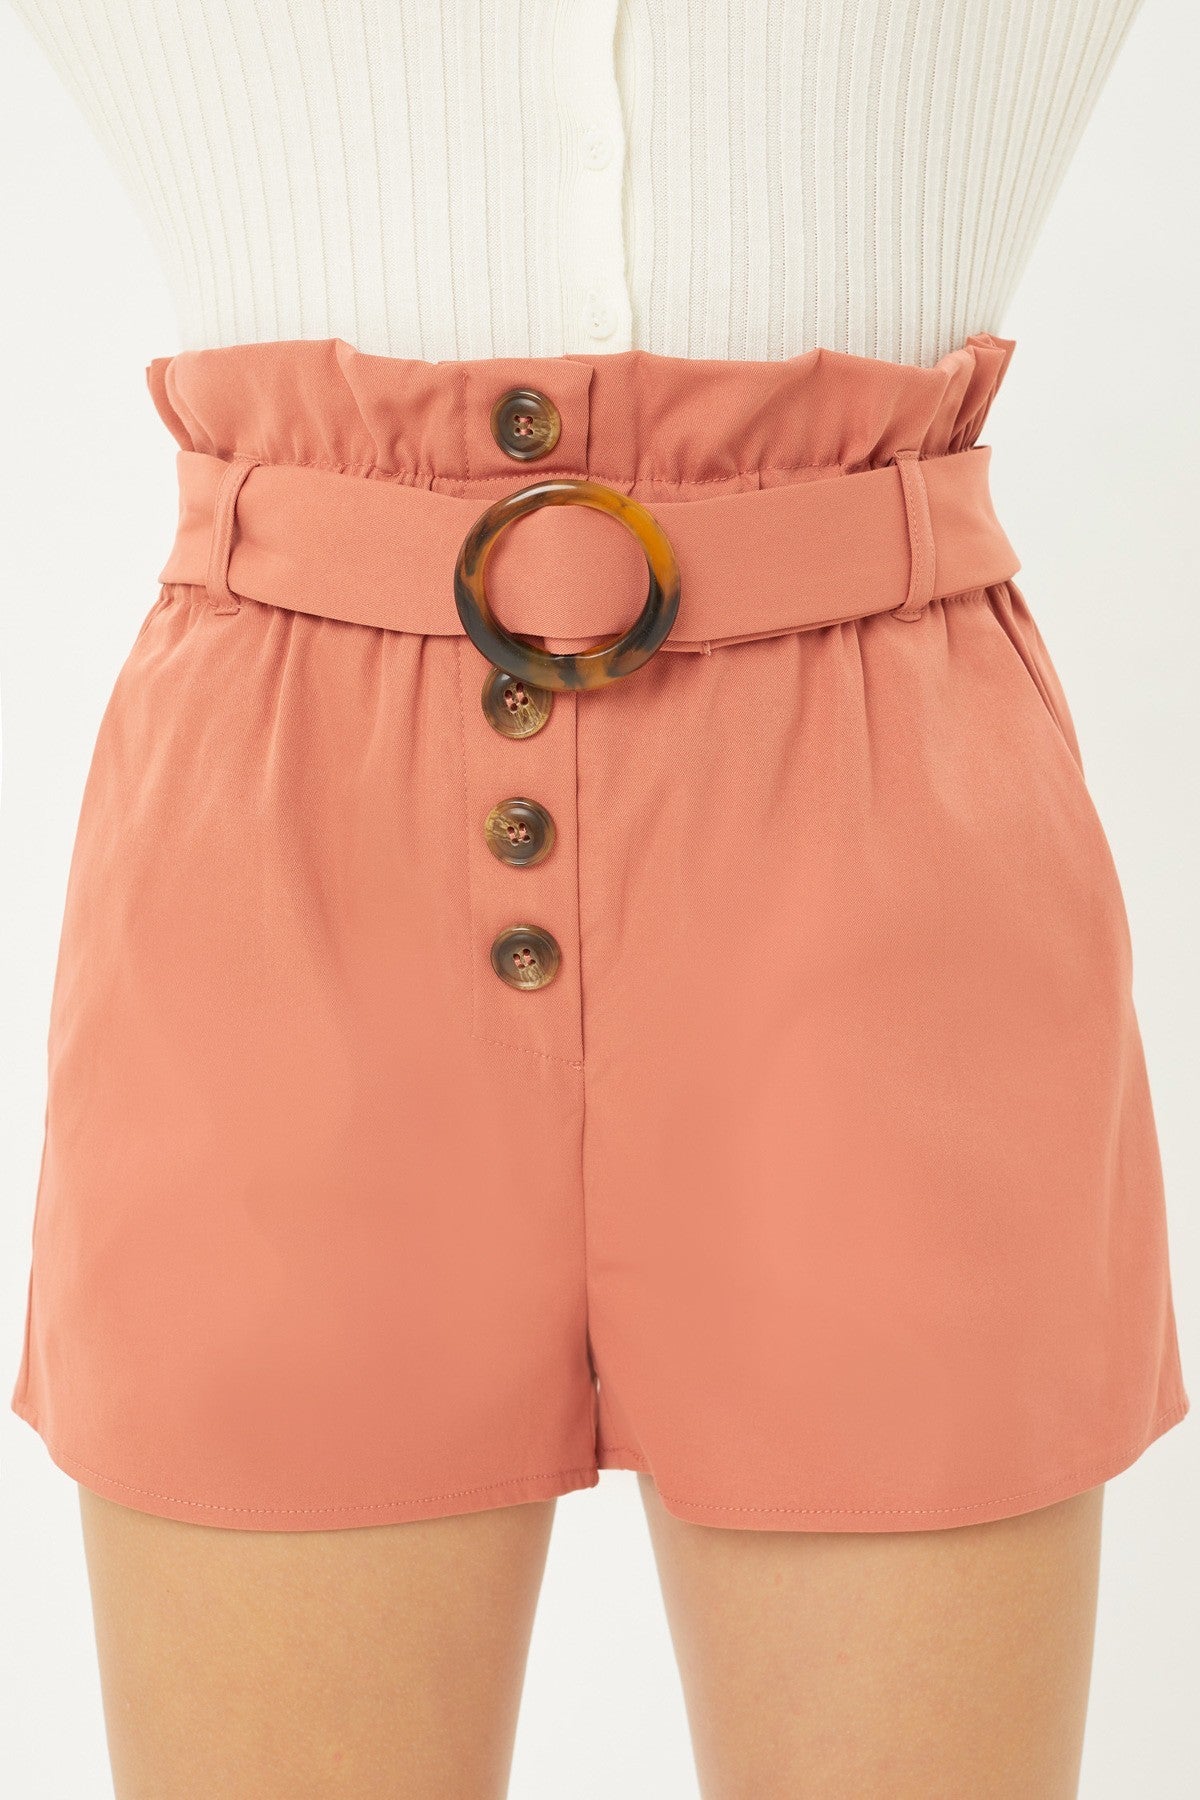 Ring Belt Buckle Shorts With Button Up Fly Closure